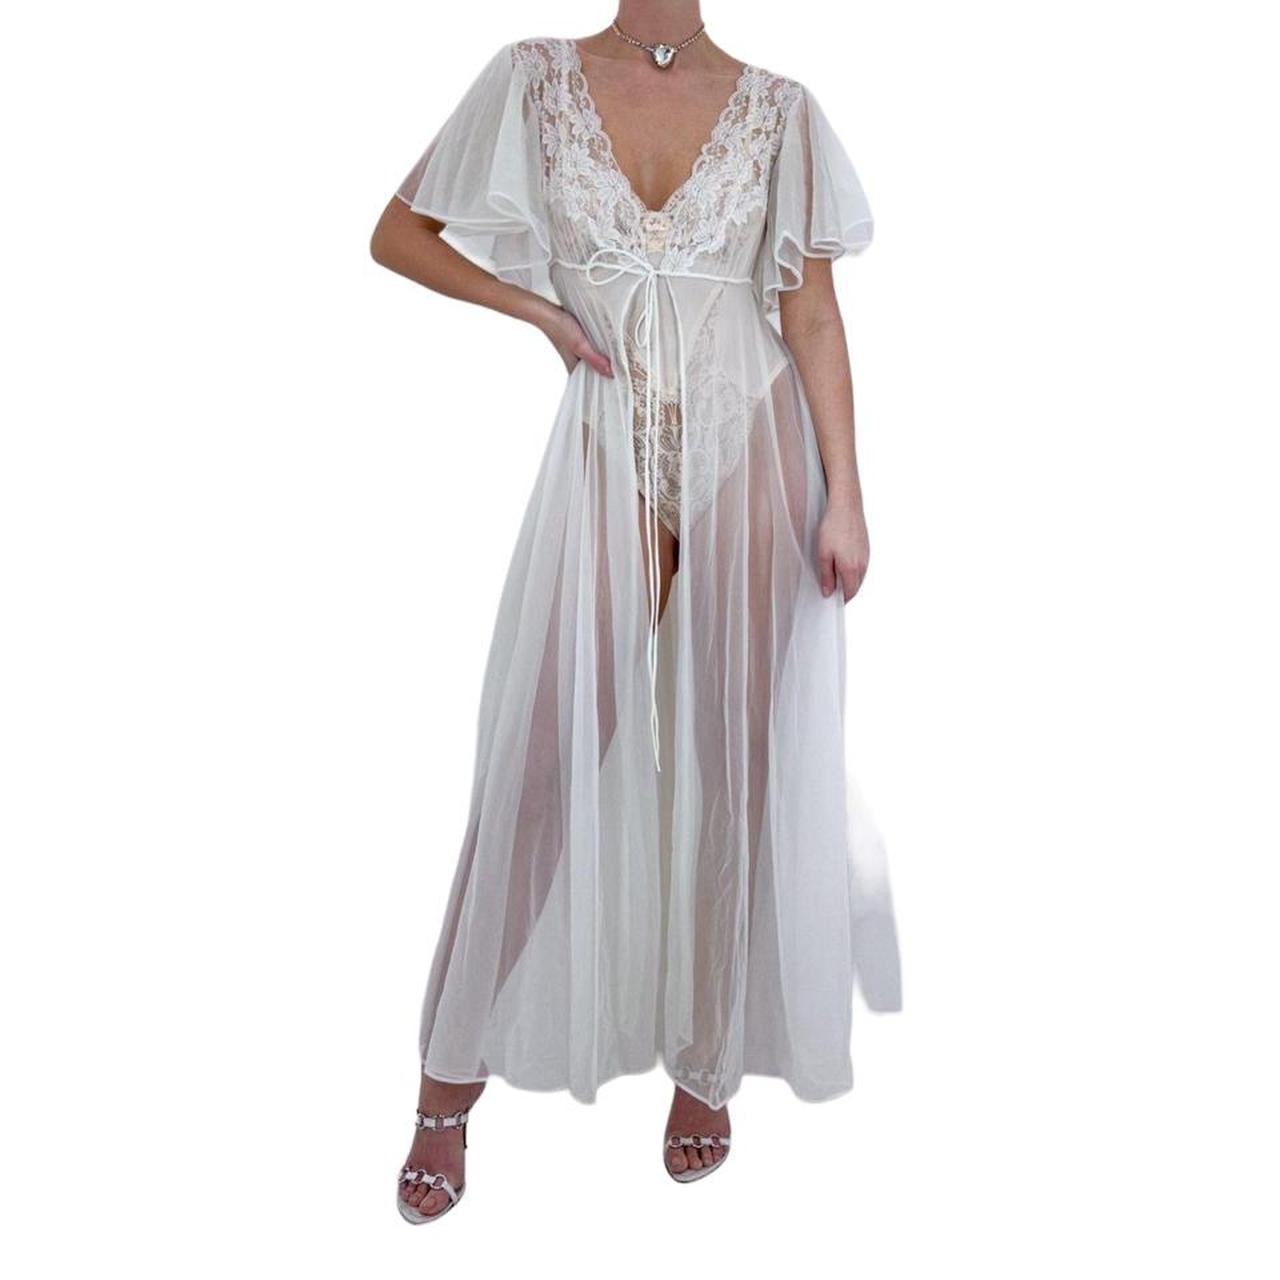 60s Vintage Rare White Sheer Long Robe w/ Butterfly Sleeves + Tie Front [S-XL]